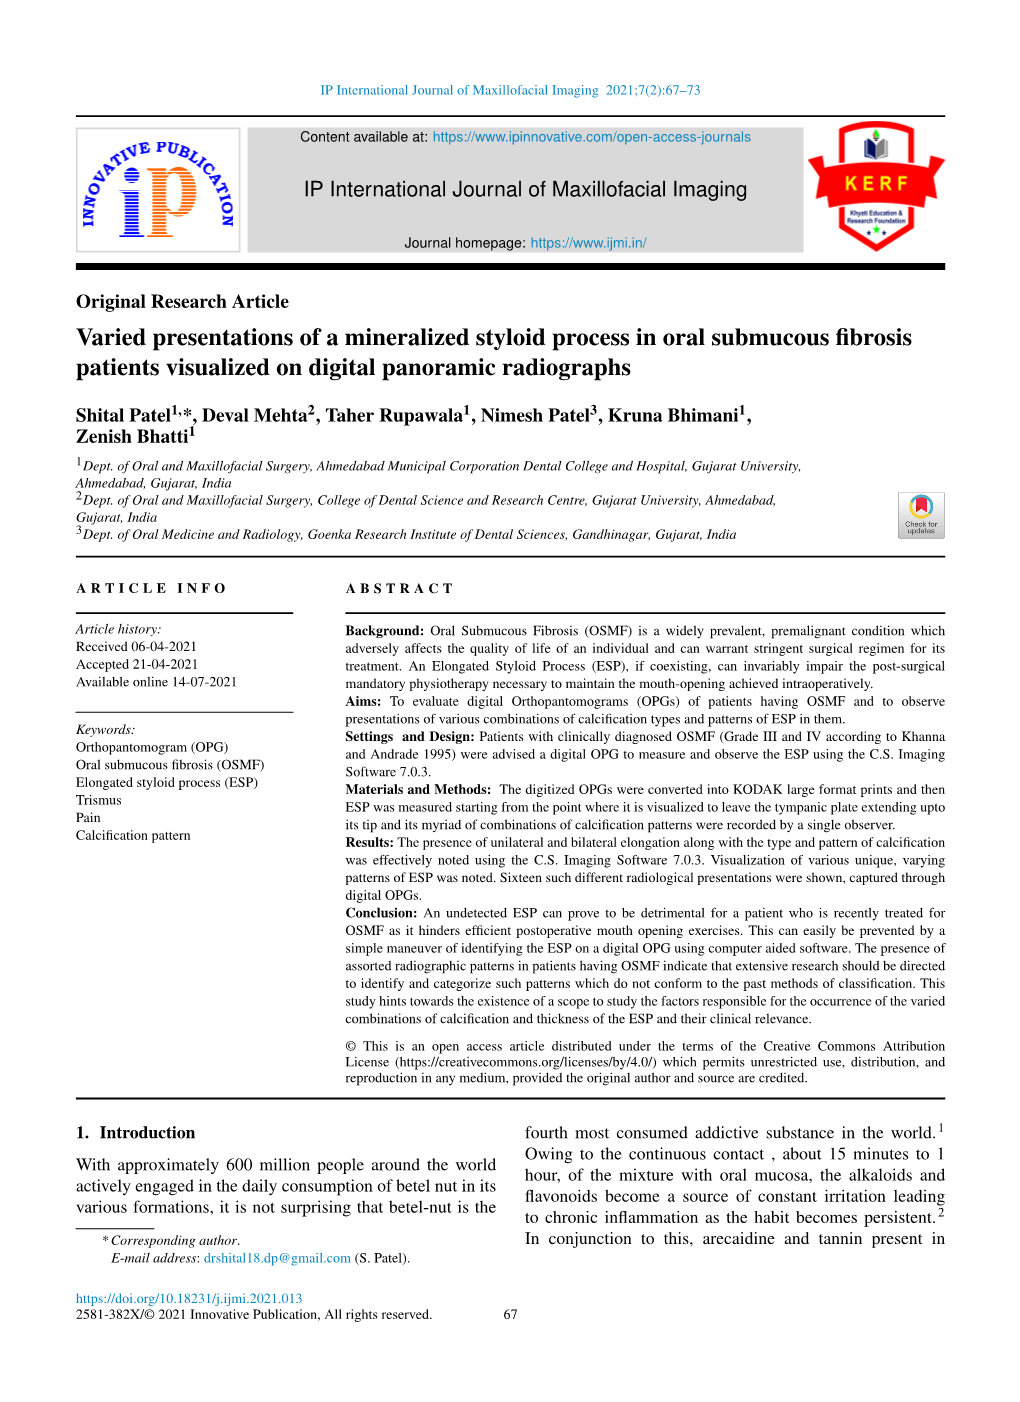 Varied Presentations of a Mineralized Styloid Process in Oral Submucous ﬁbrosis Patients Visualized on Digital Panoramic Radiographs